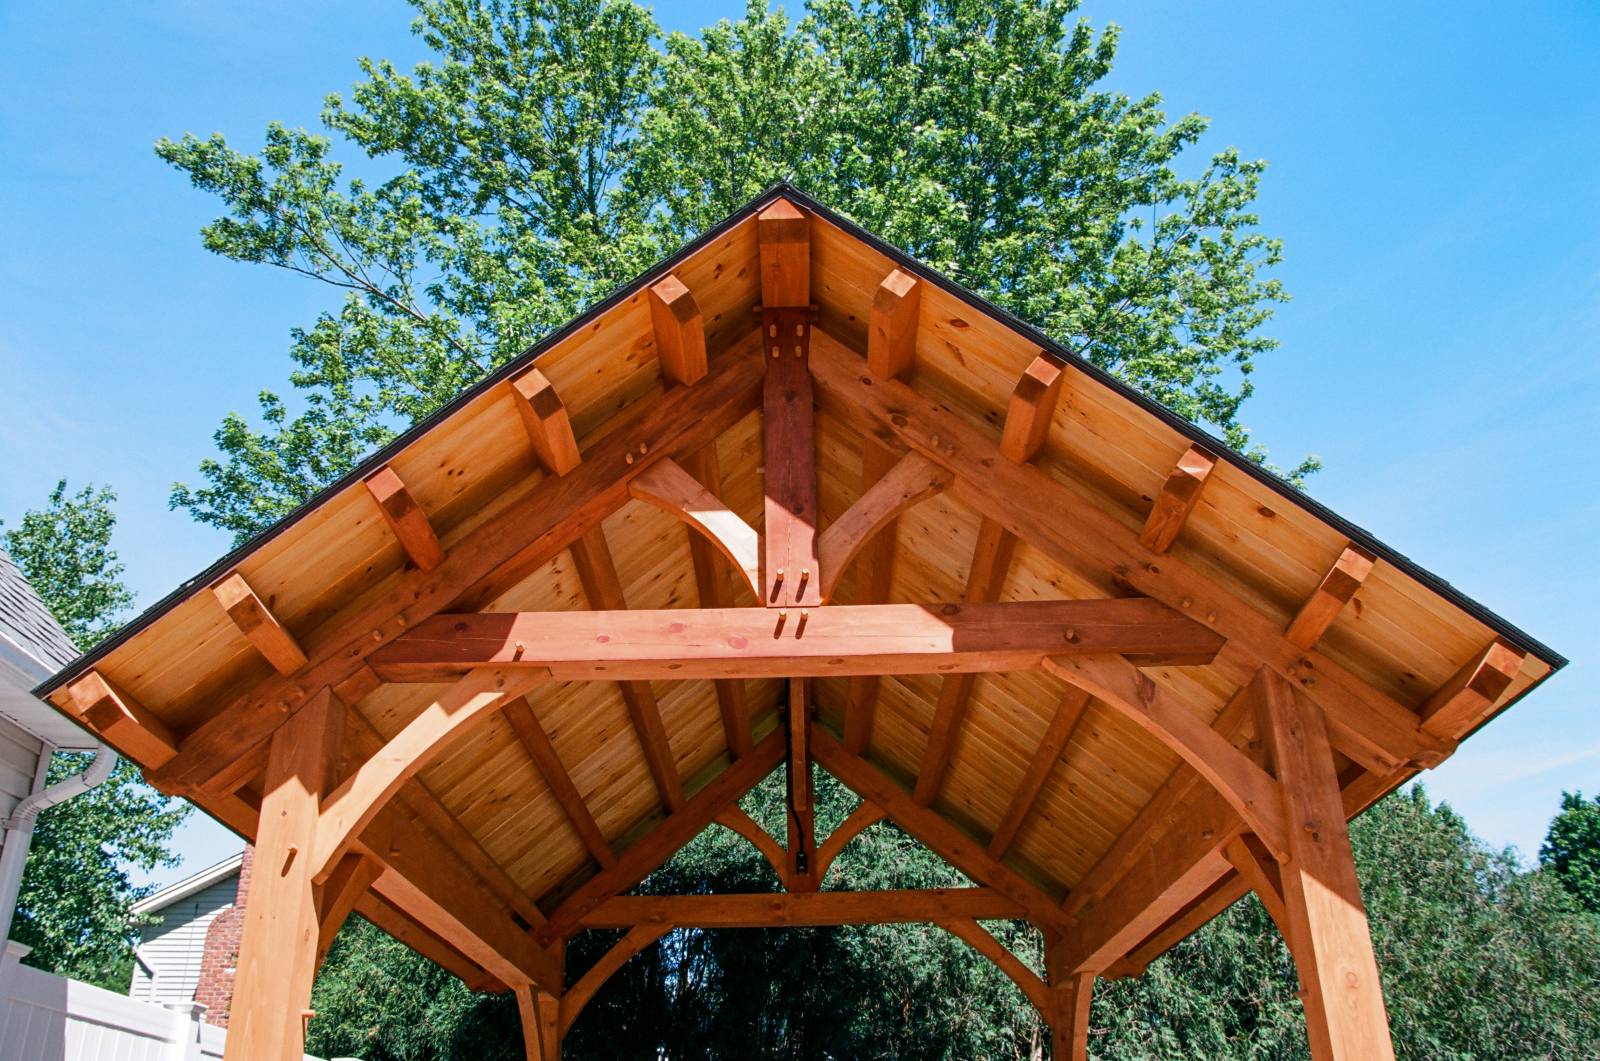 Looking up at the timber frame pavilion with common purlins & king post trusses